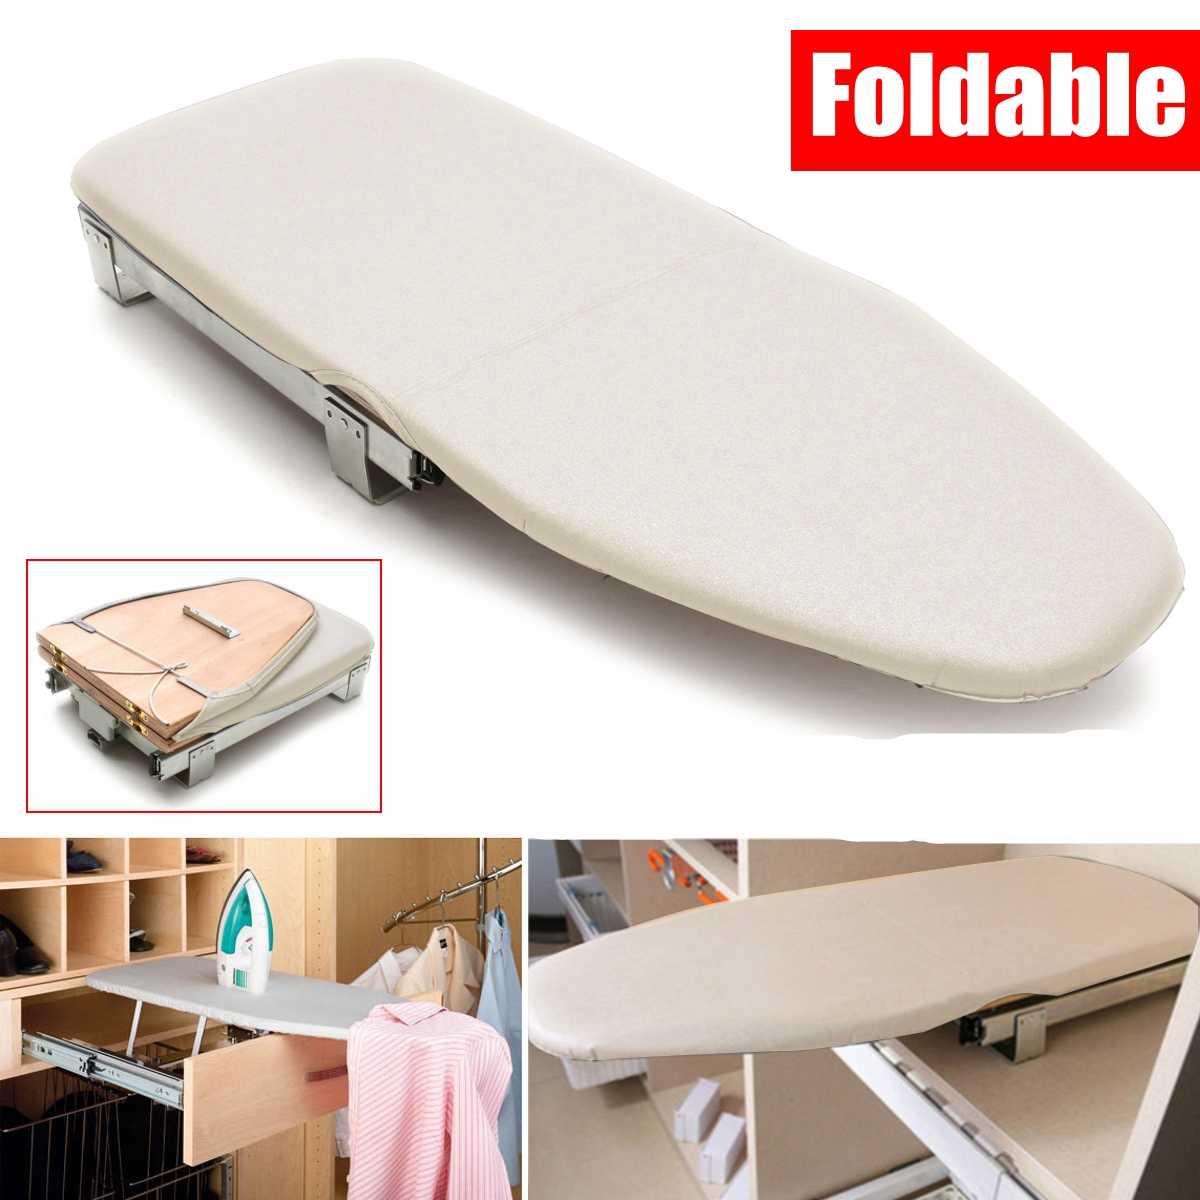 Wooden Ironing Board Folding Ironing Board Heat Resistant Space Saving Carbinet Drawer Mounted with Ironing Board Cover Pull Out